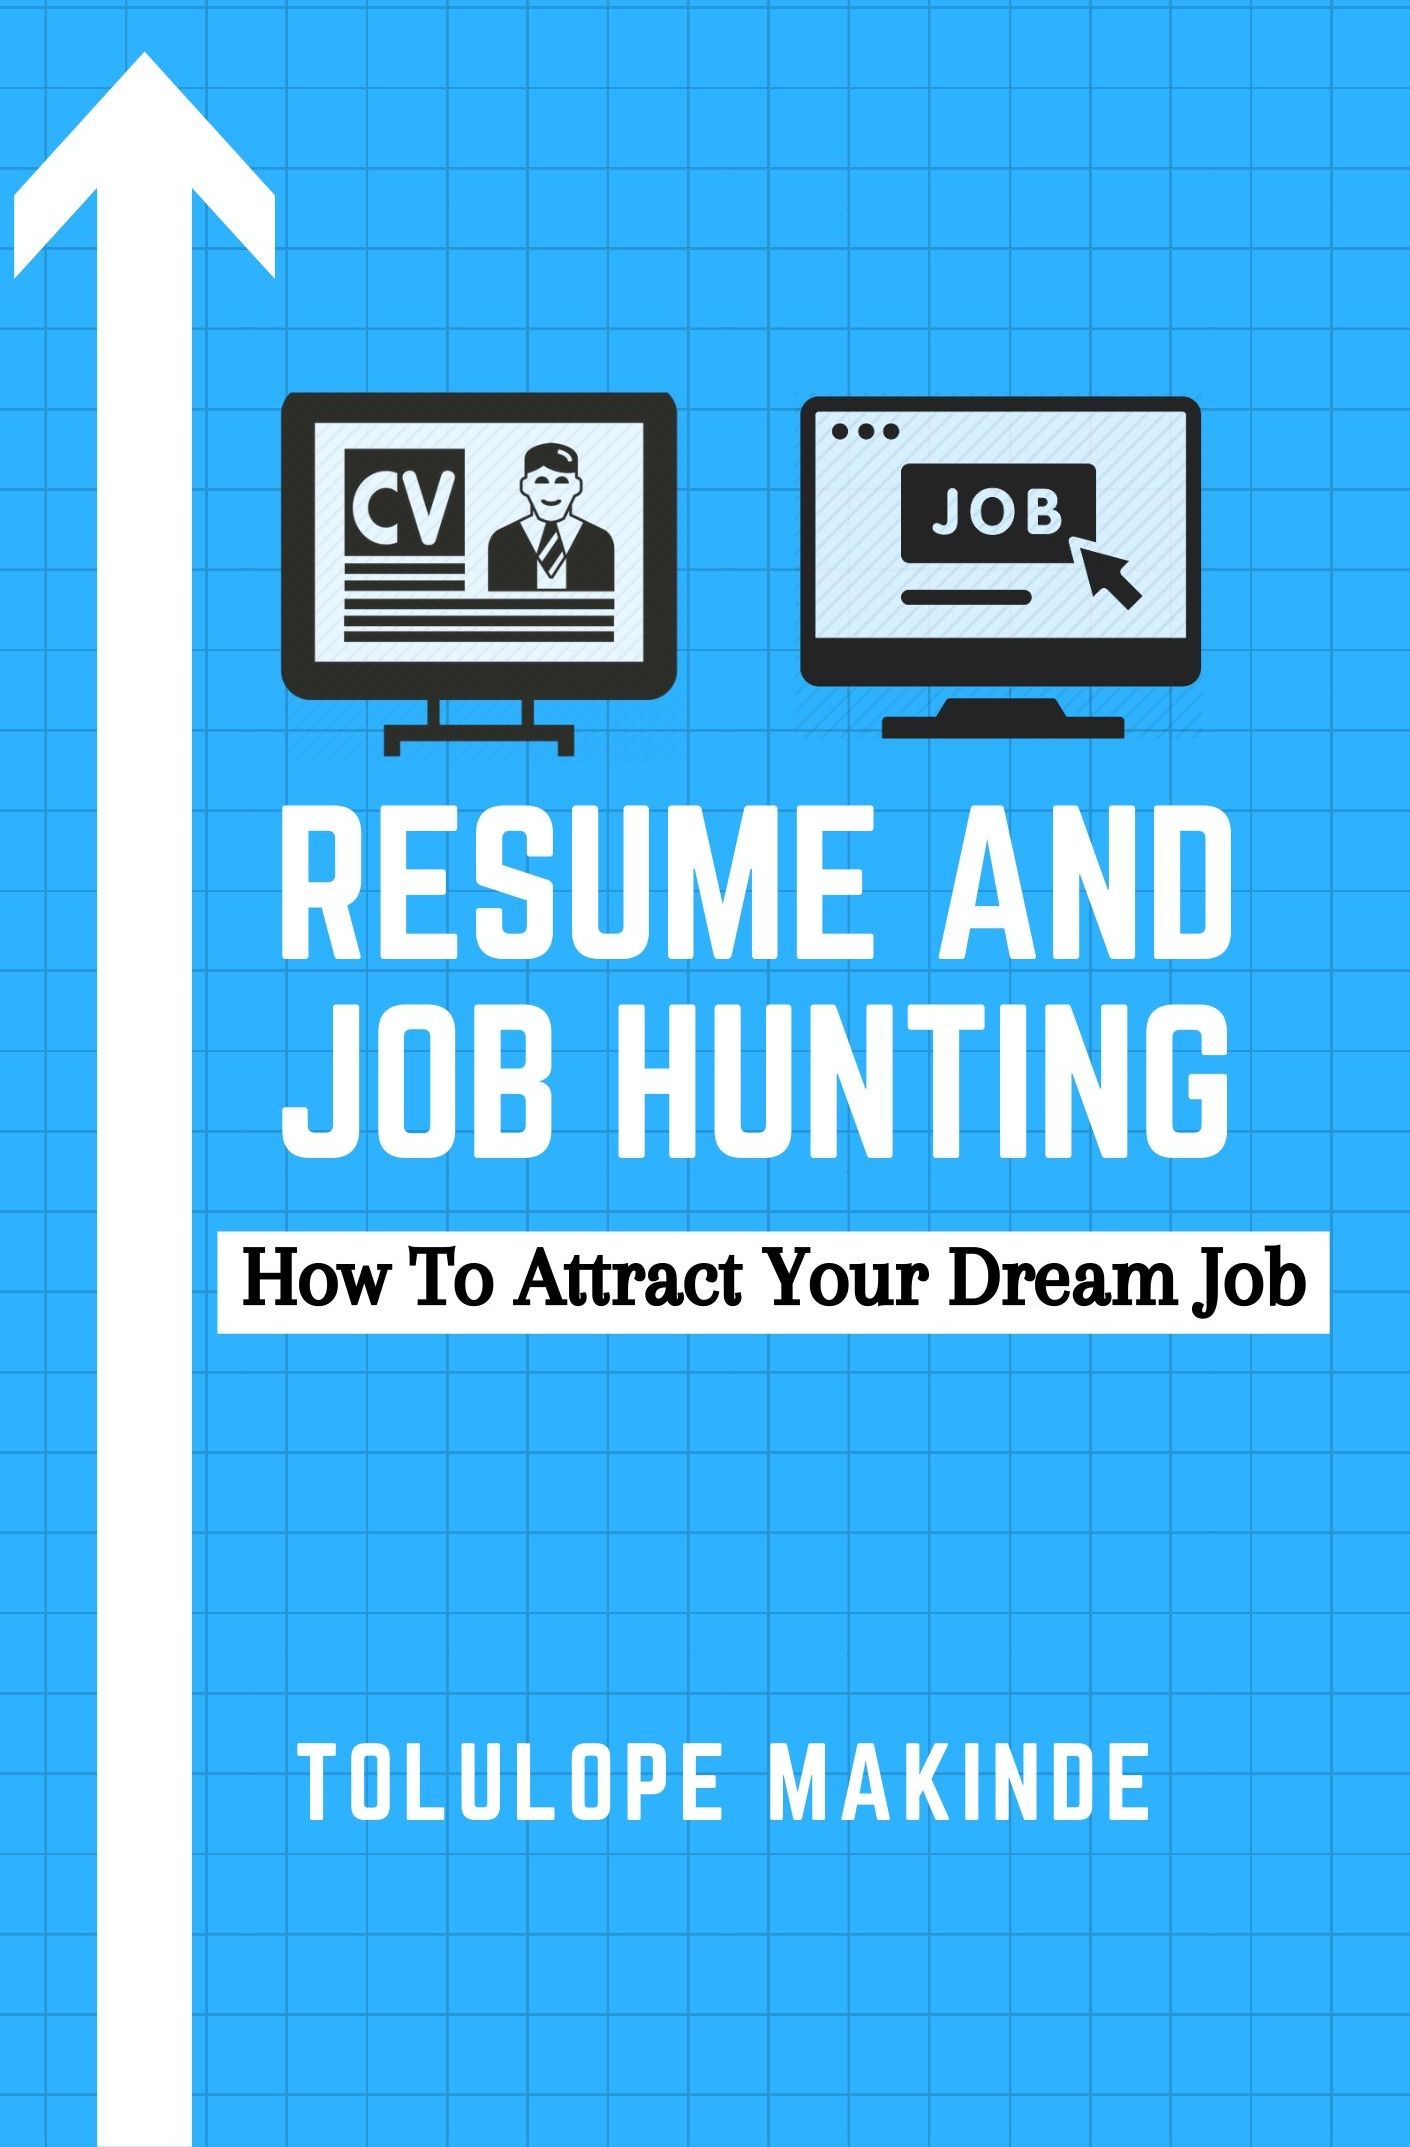 Resume-And-Job-Hunting---How-To-Attract-Your-Dream-Job